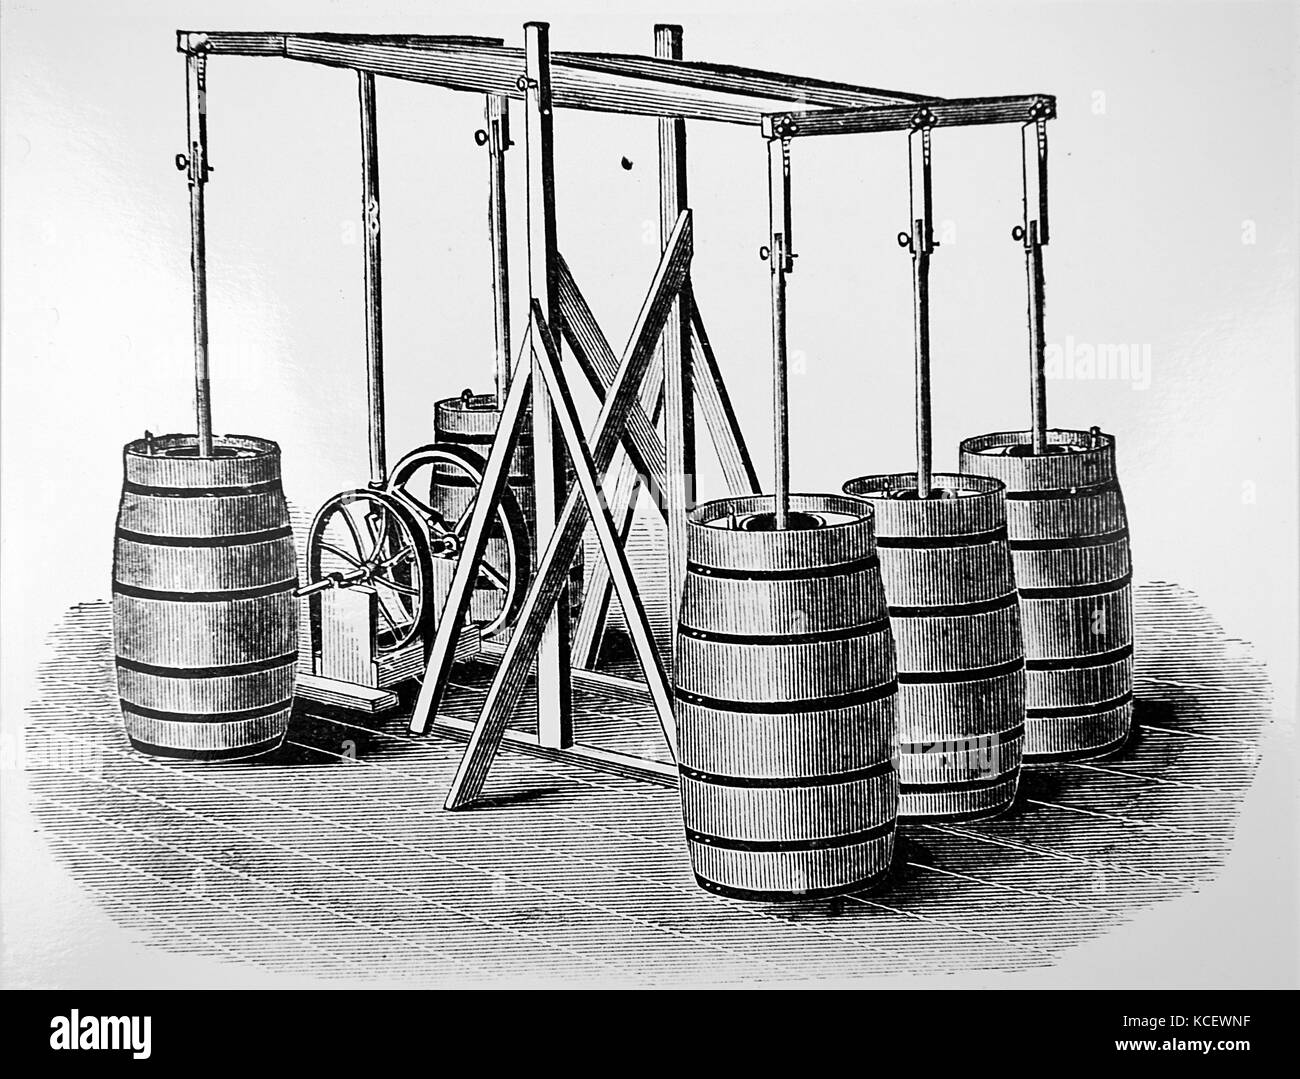 Engraving depicting a battery of churns with vertical dashers as used in Jones, Gaulkner & Co.'s butter factory. Dated 19th Century Stock Photo